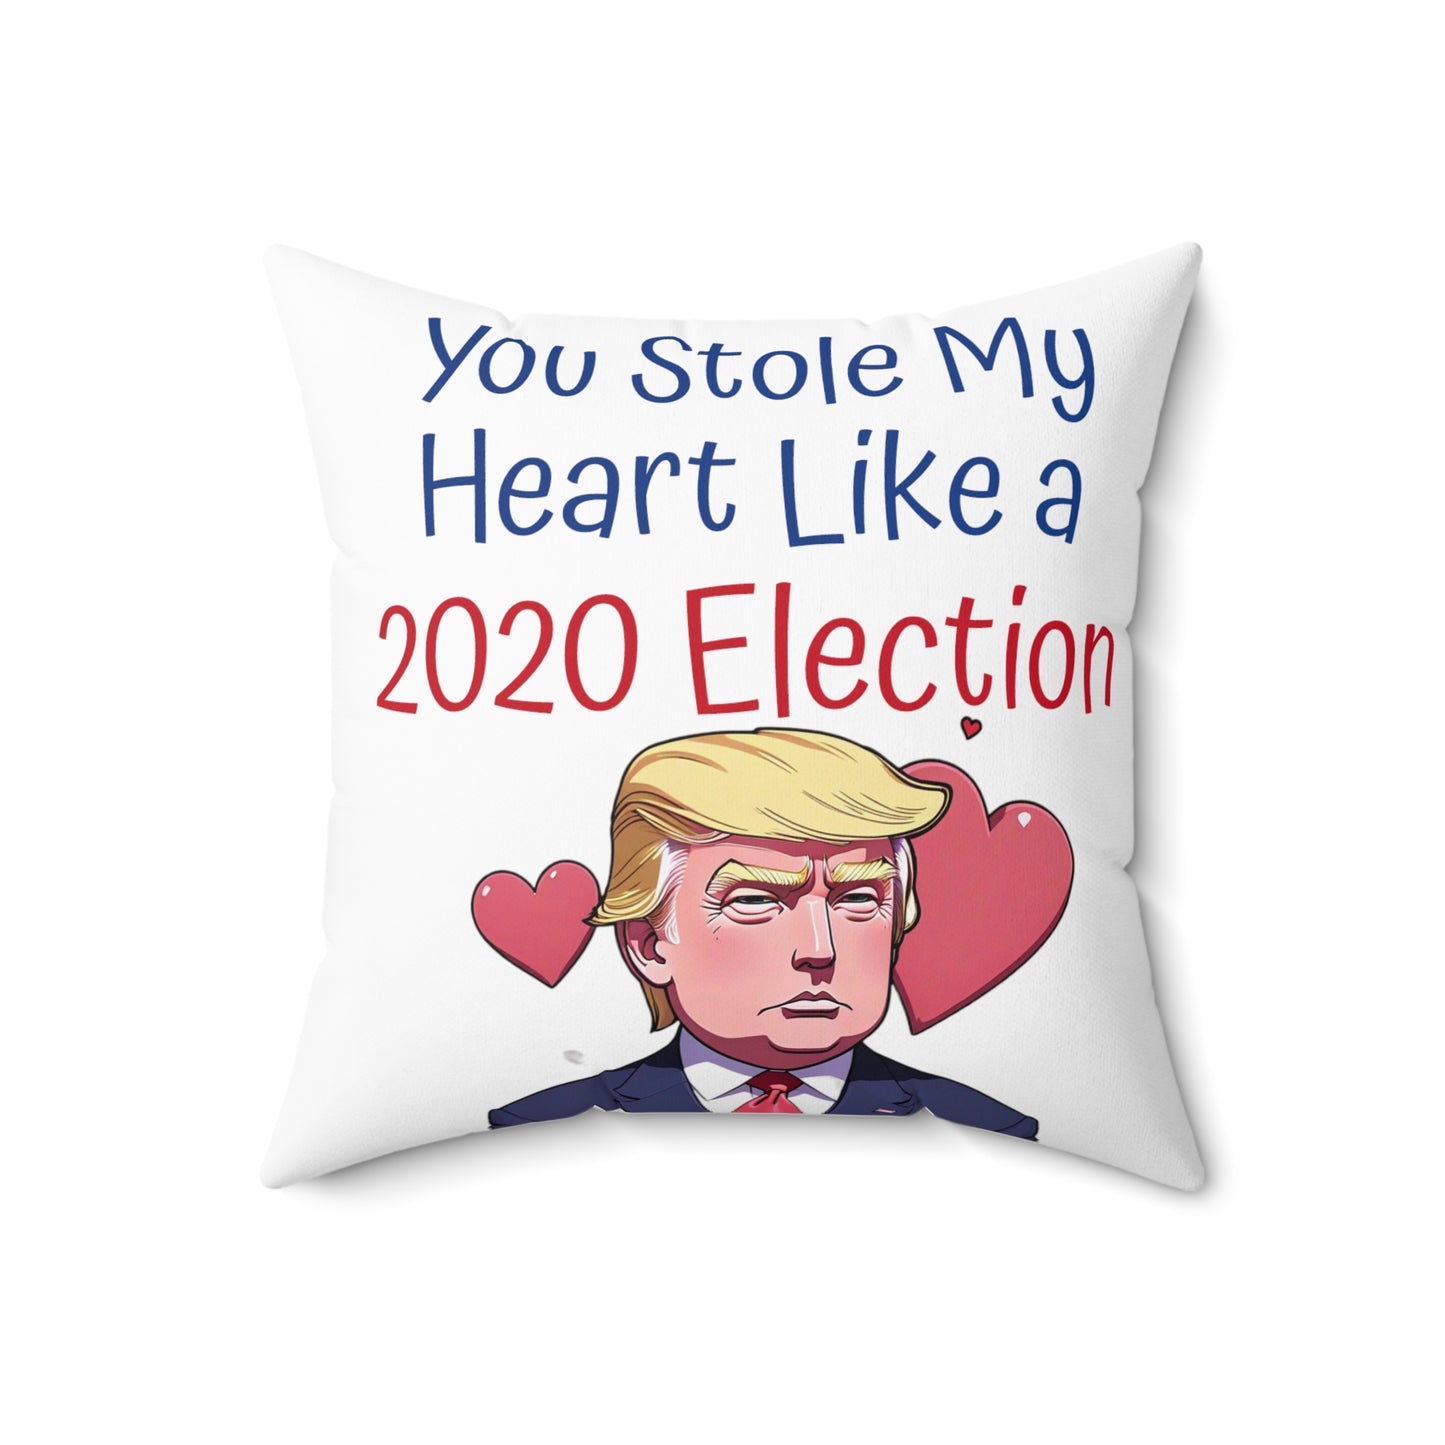 You Stole My Heart Like a 2020 Election Spun Polyester Square Pillow Trump